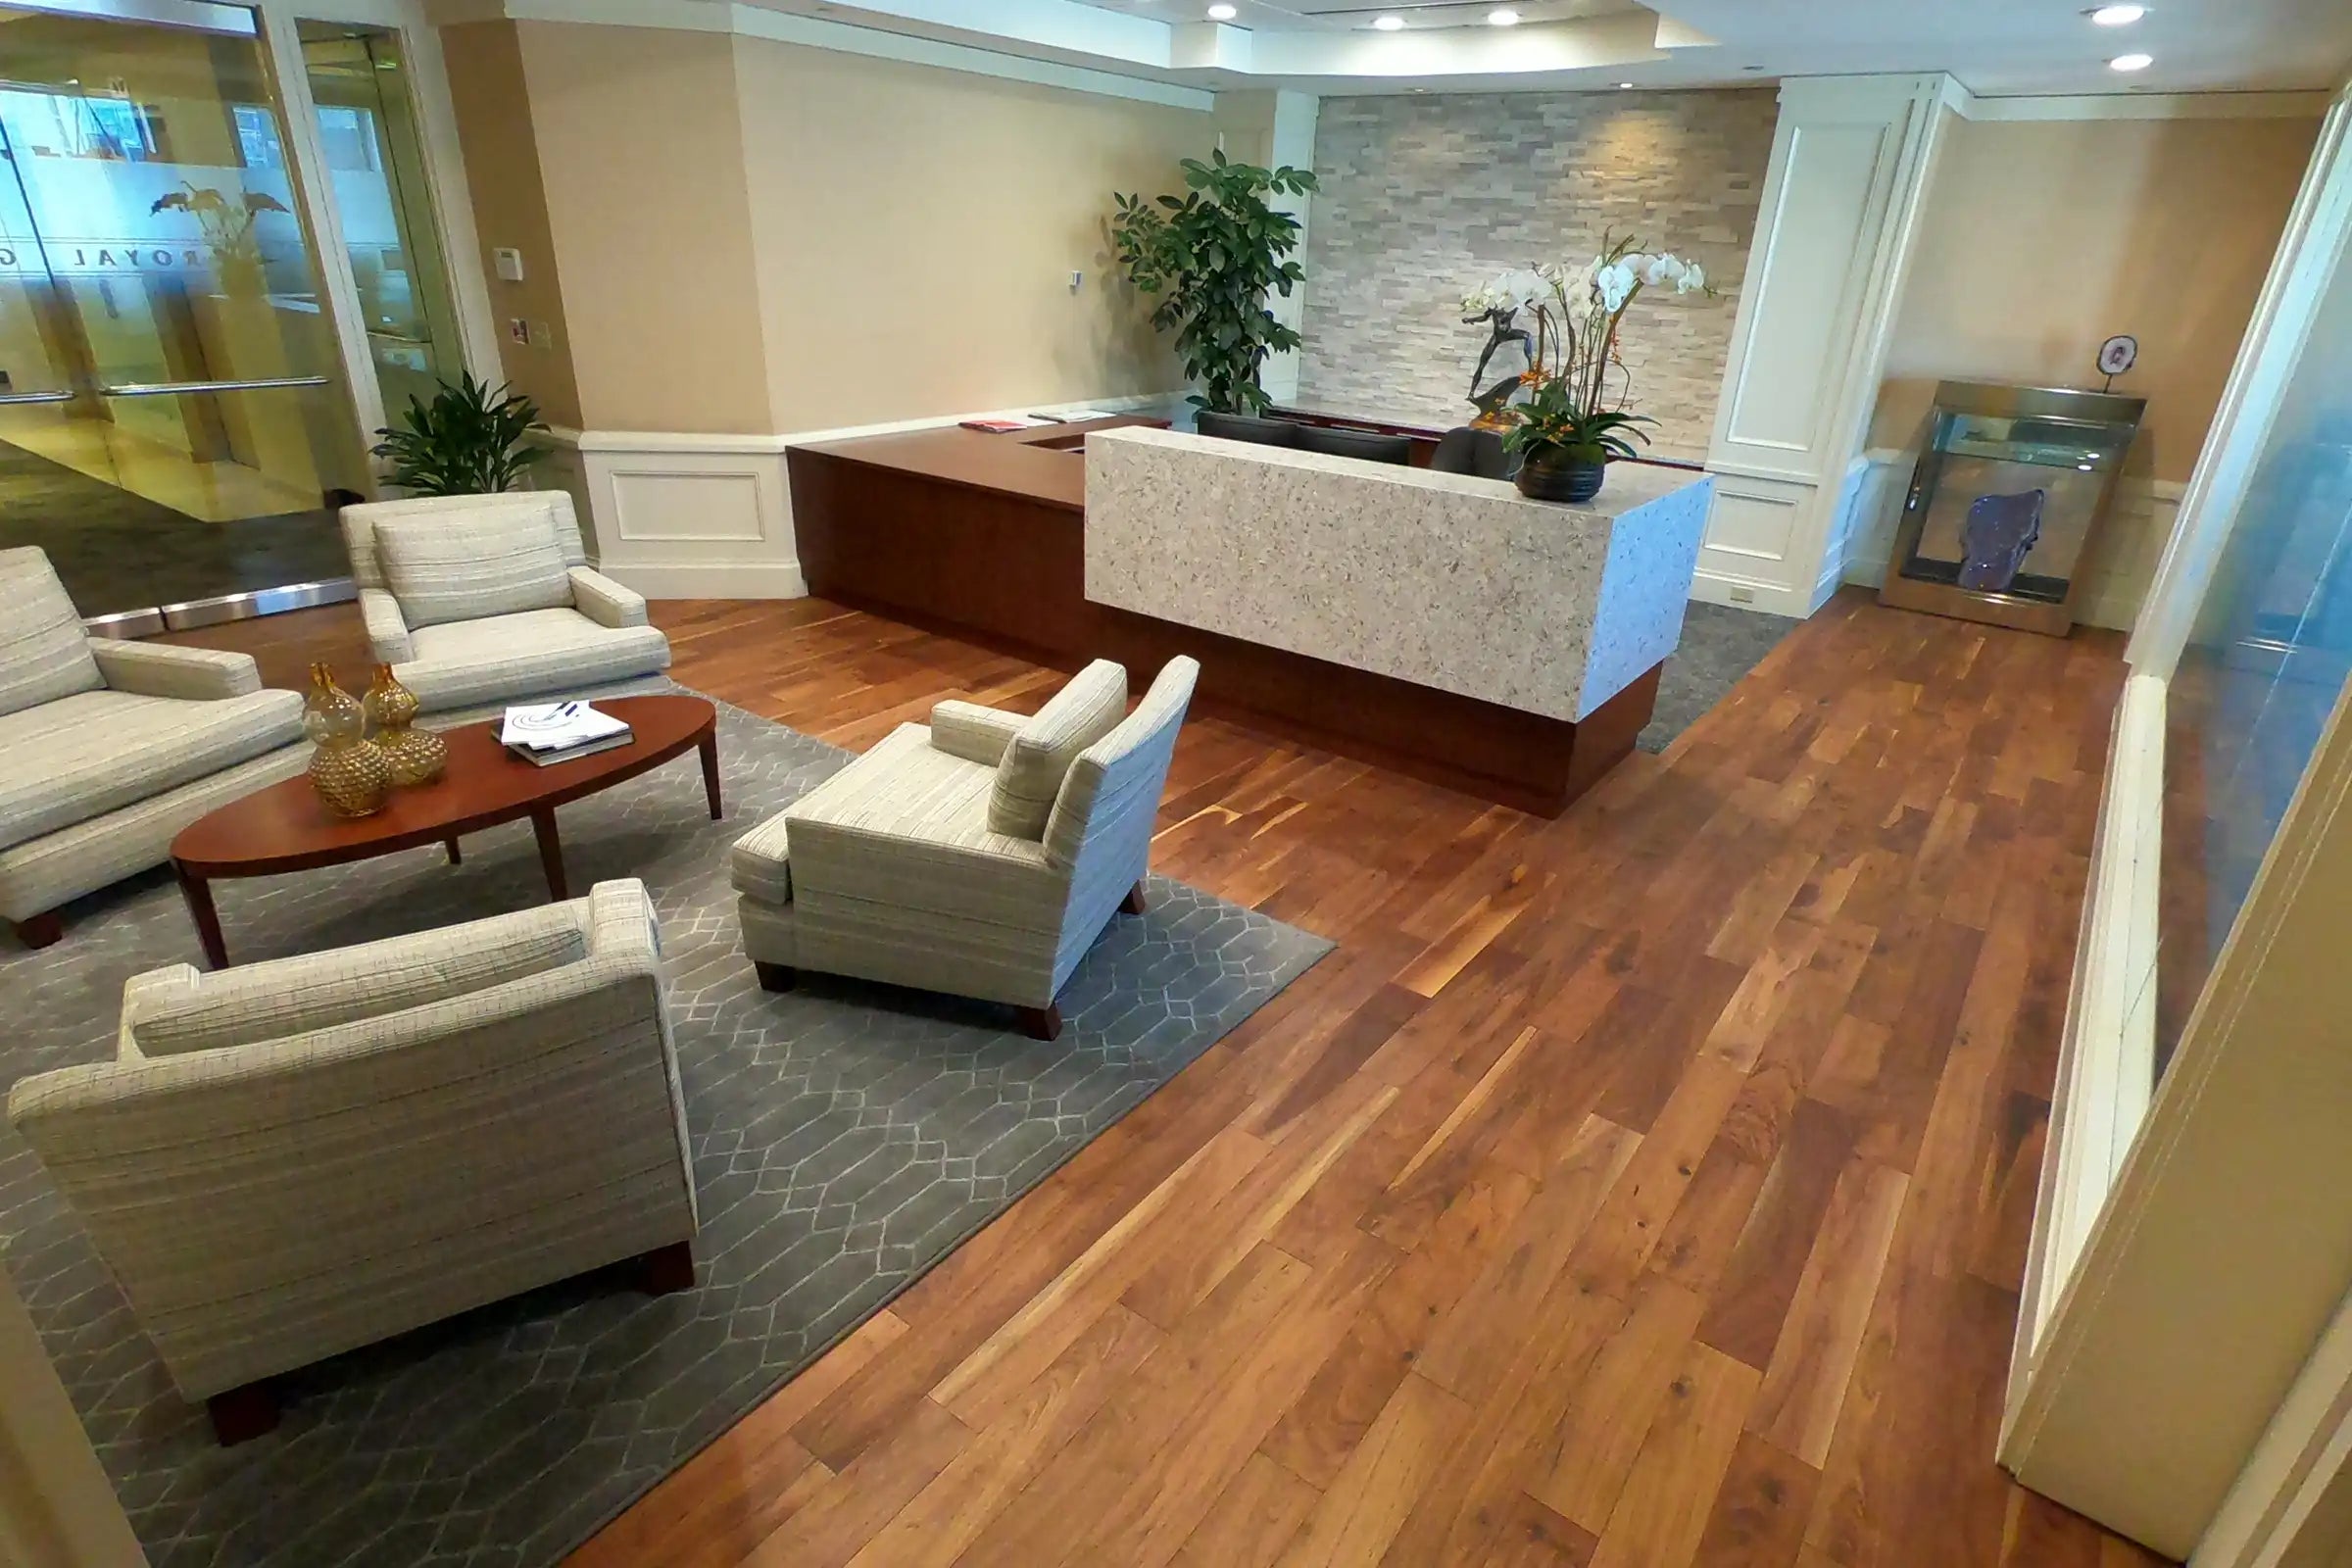 Floor Flooring WD Walls sustainable wood paneling plank accent wall materials